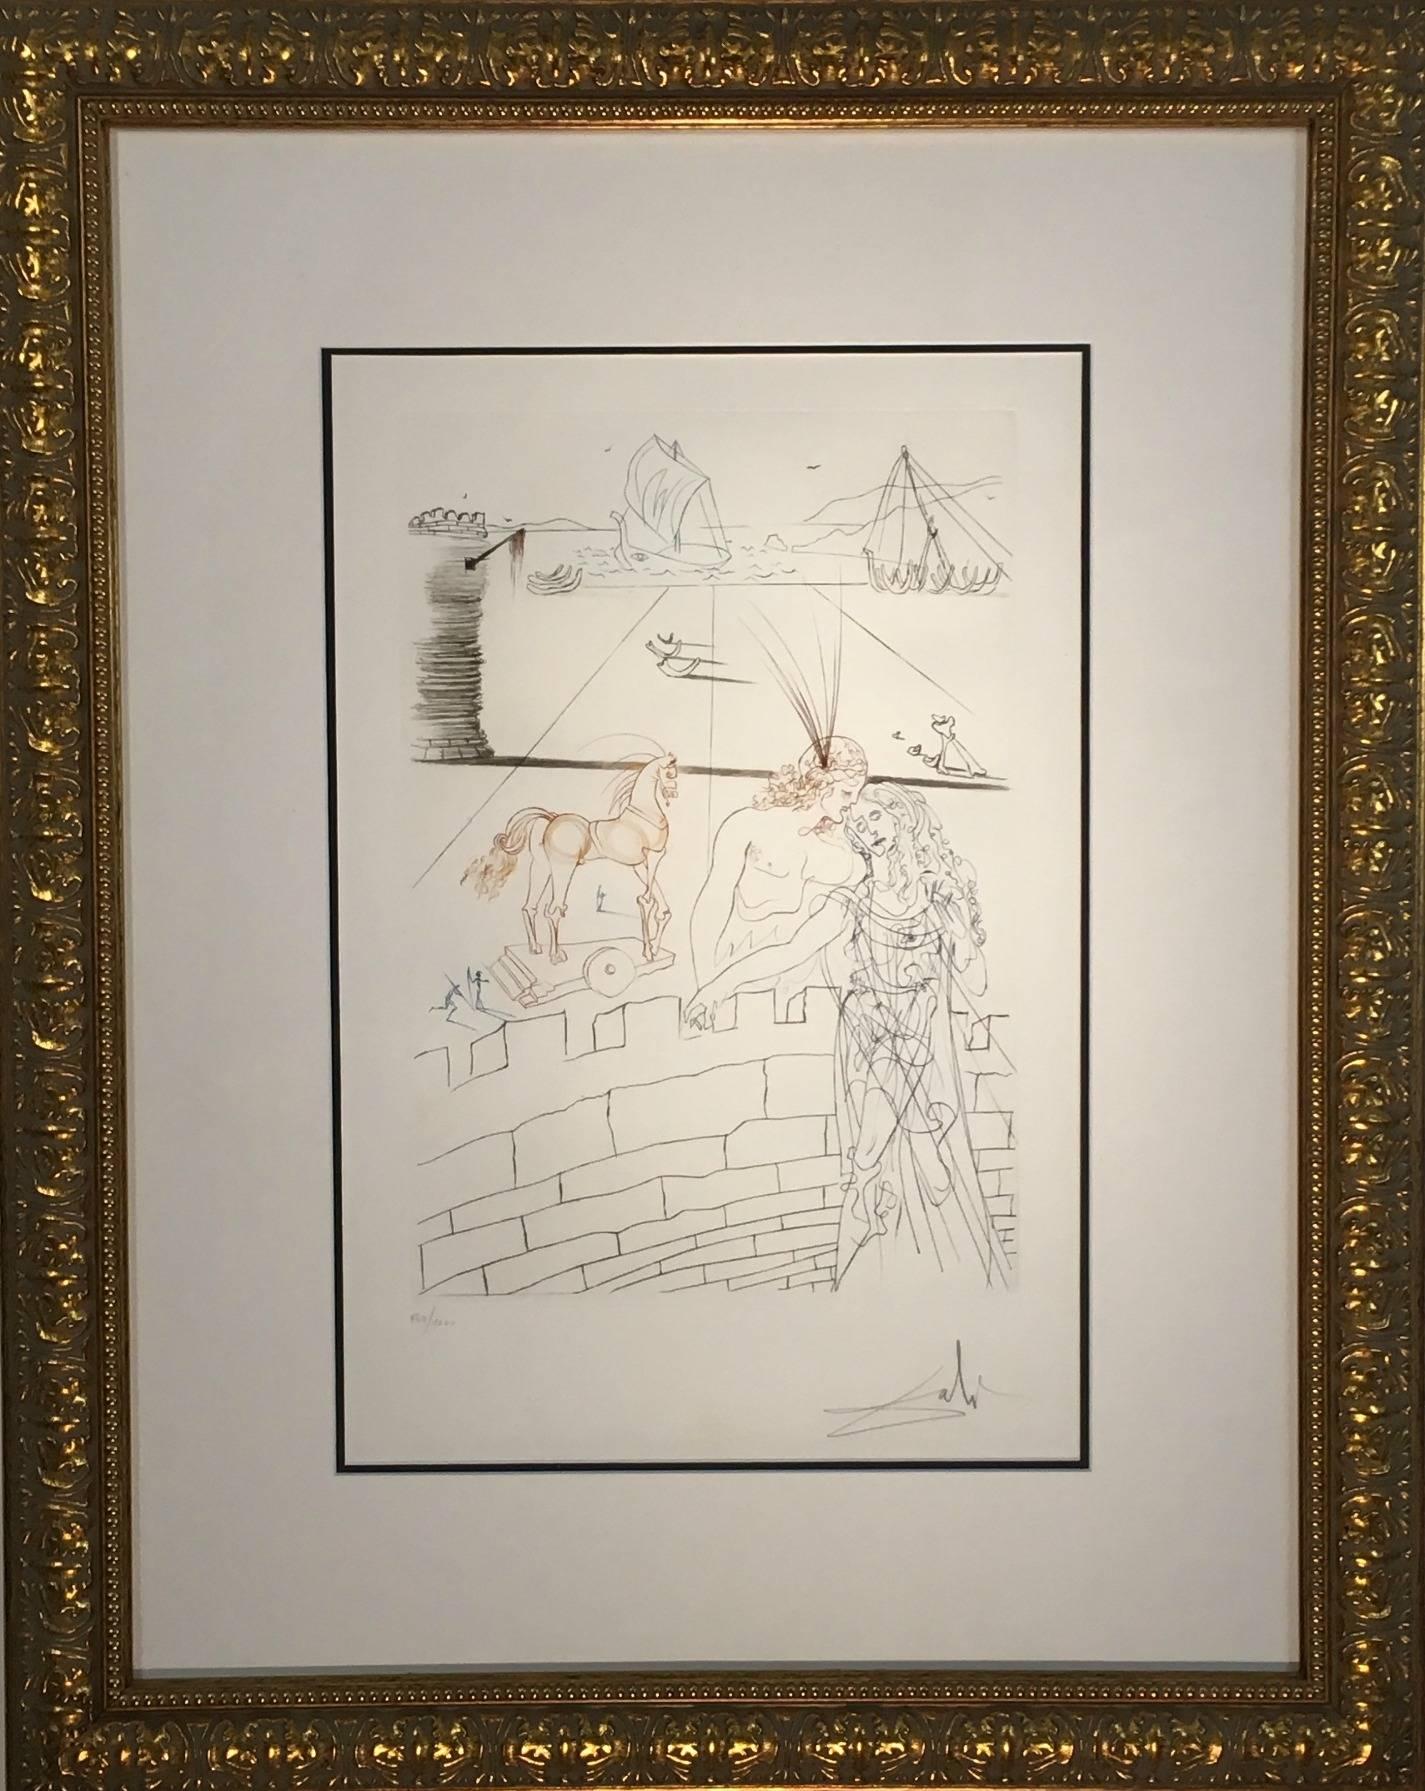 "Helen of Troy and Paris" - Print by Salvador Dalí